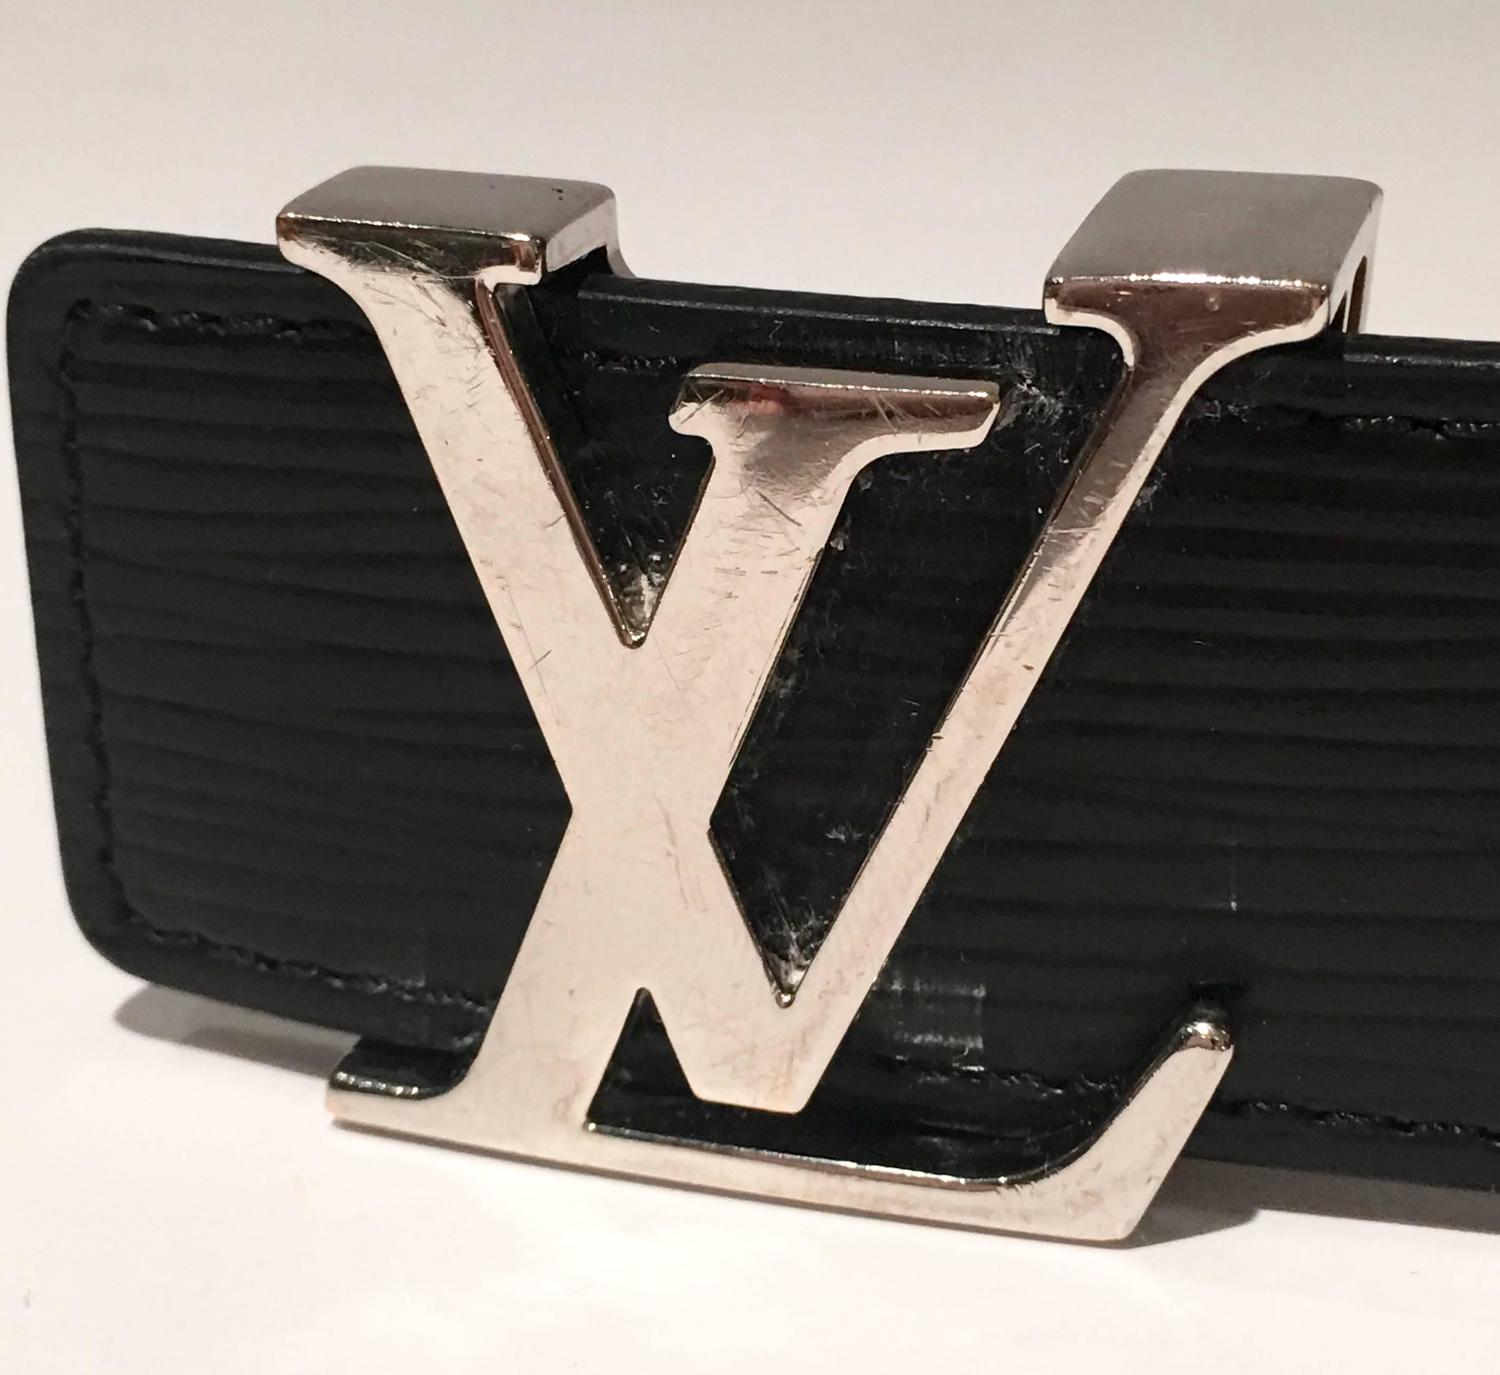 Louis Vuitton &quot;LV&quot; Chrome Logo and Epi Leather Belt For Sale at 1stdibs